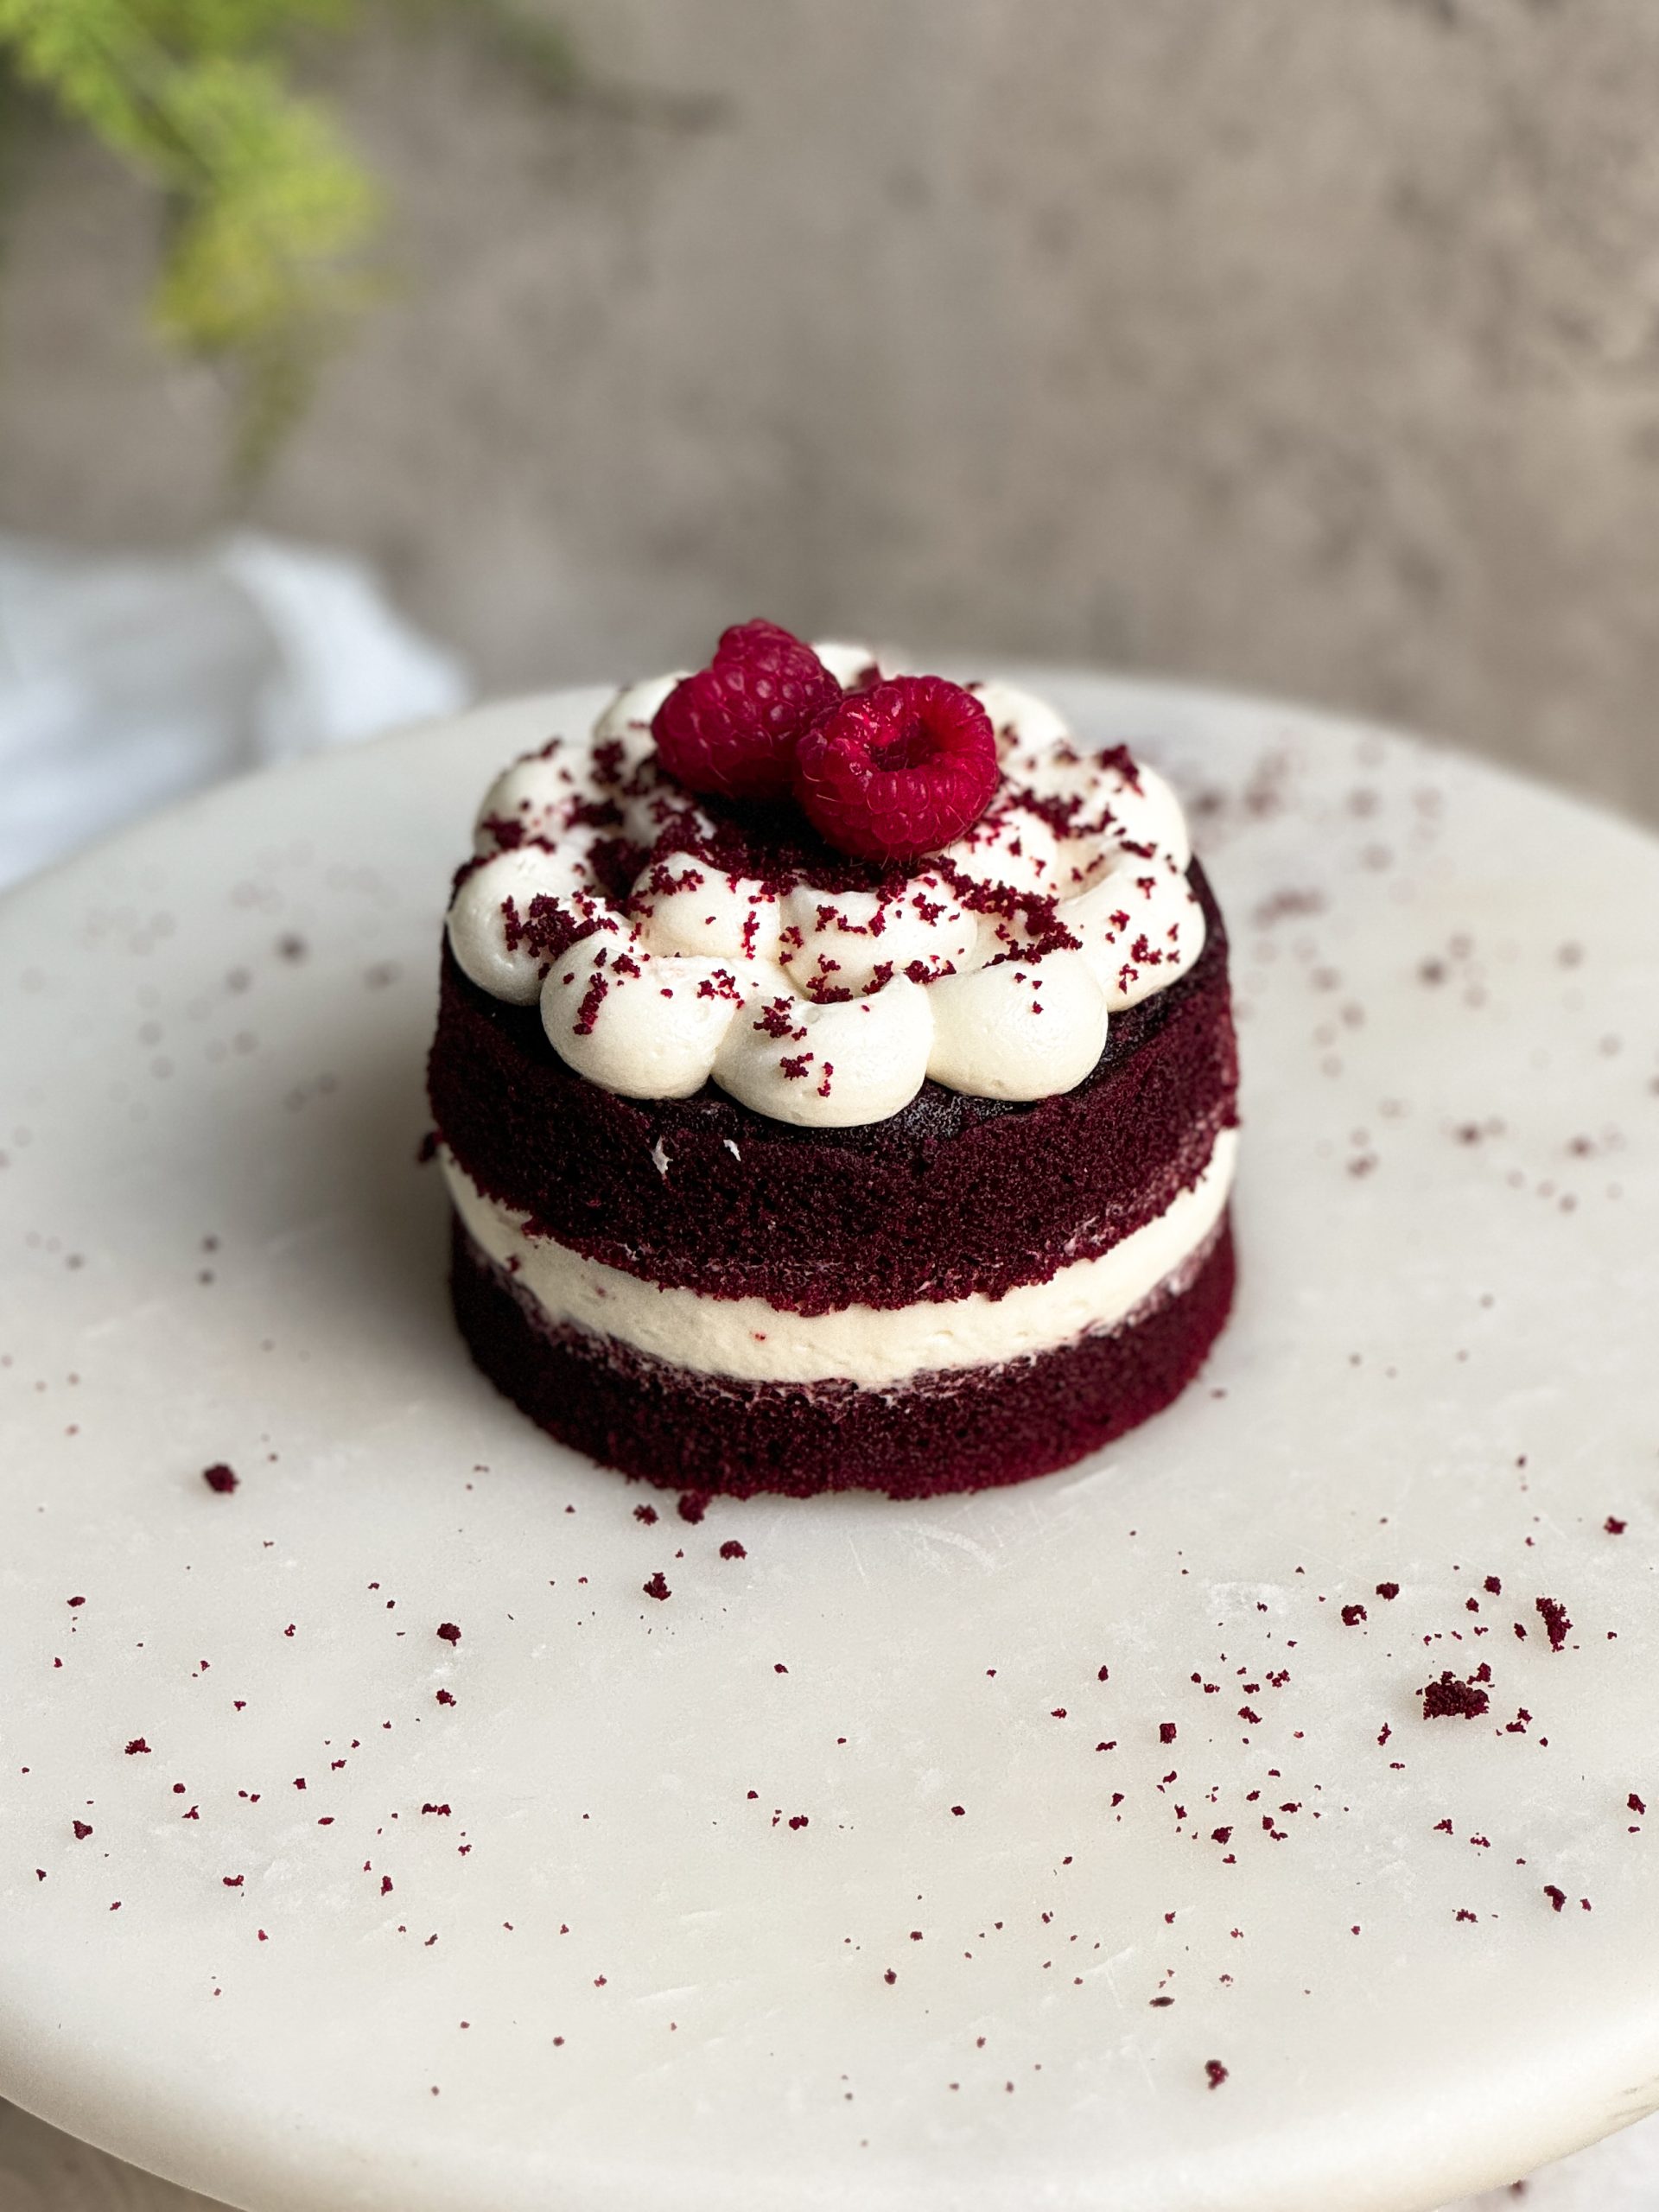 single serve small red velvet cake with cream cheese frosting on a marble serving board. picture from an angle